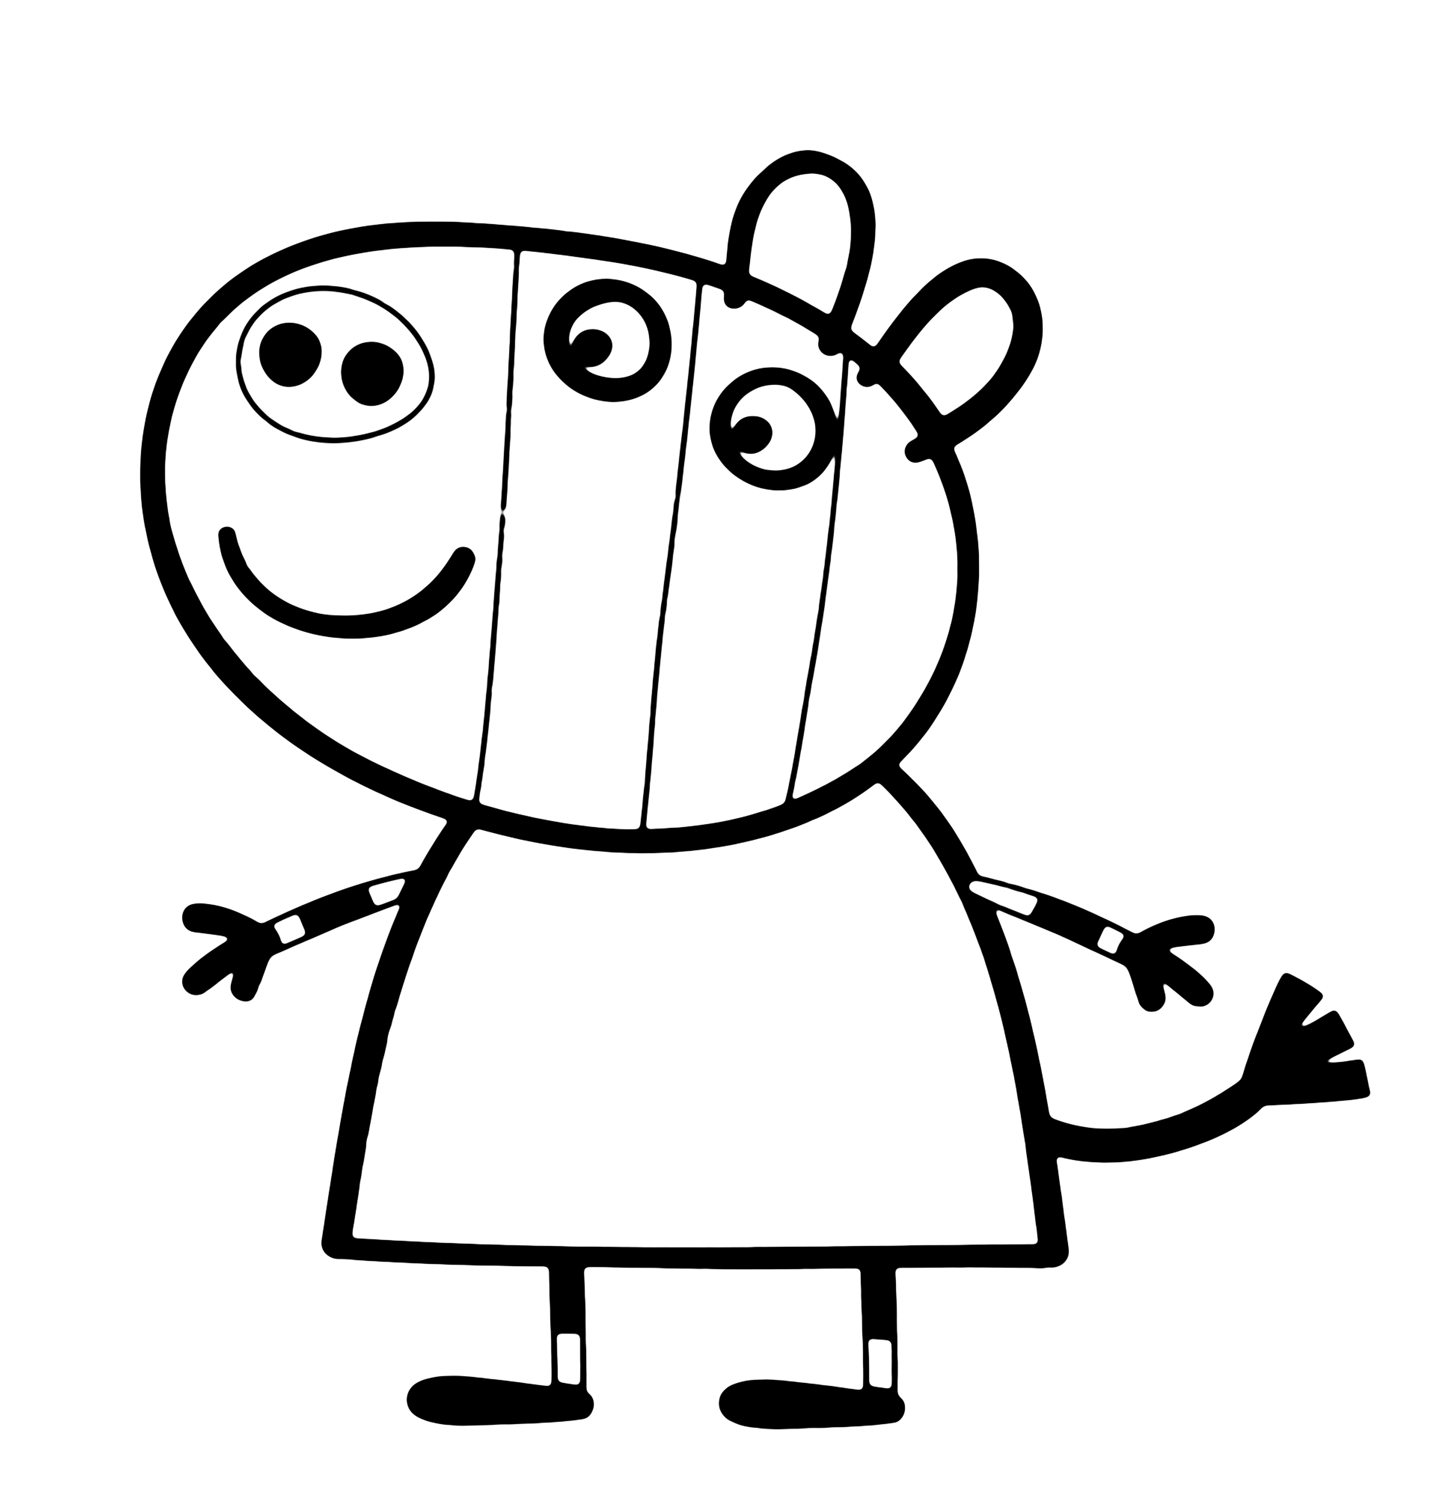 Free Peppa Pig And Friends Coloring Pages Print, Download avec Peppa Pig A Colorier 